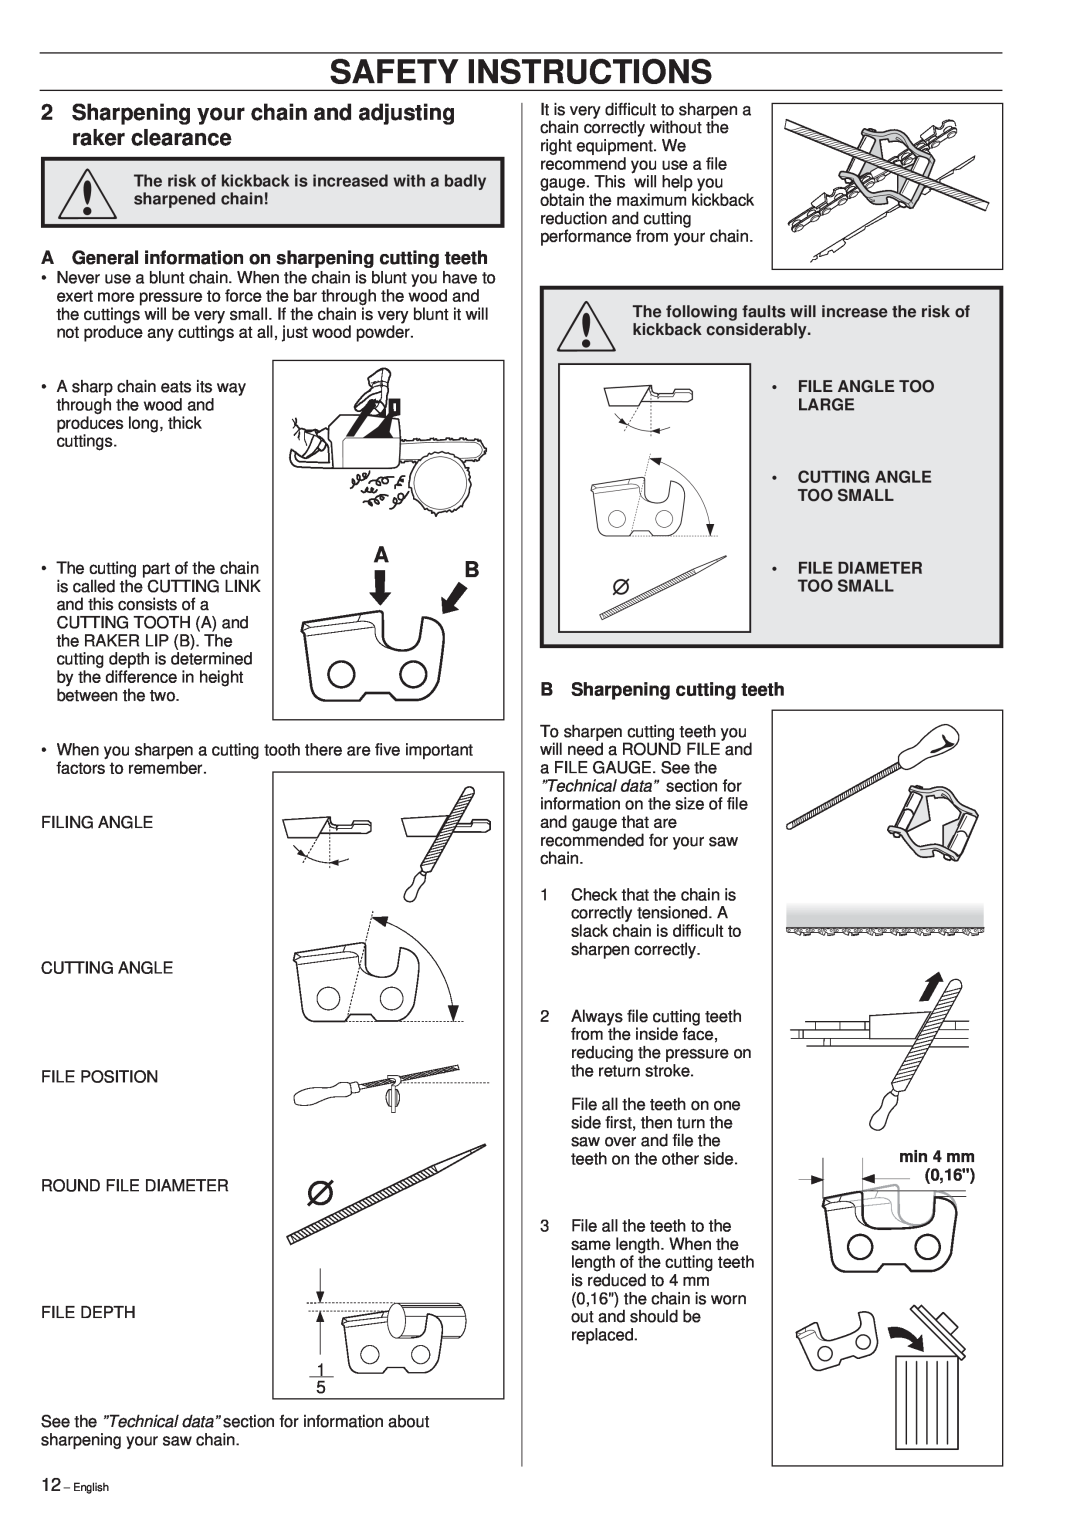 Husqvarna 261 manual Safety Instructions, Sharpening your chain and adjusting raker clearance, B Sharpening cutting teeth 